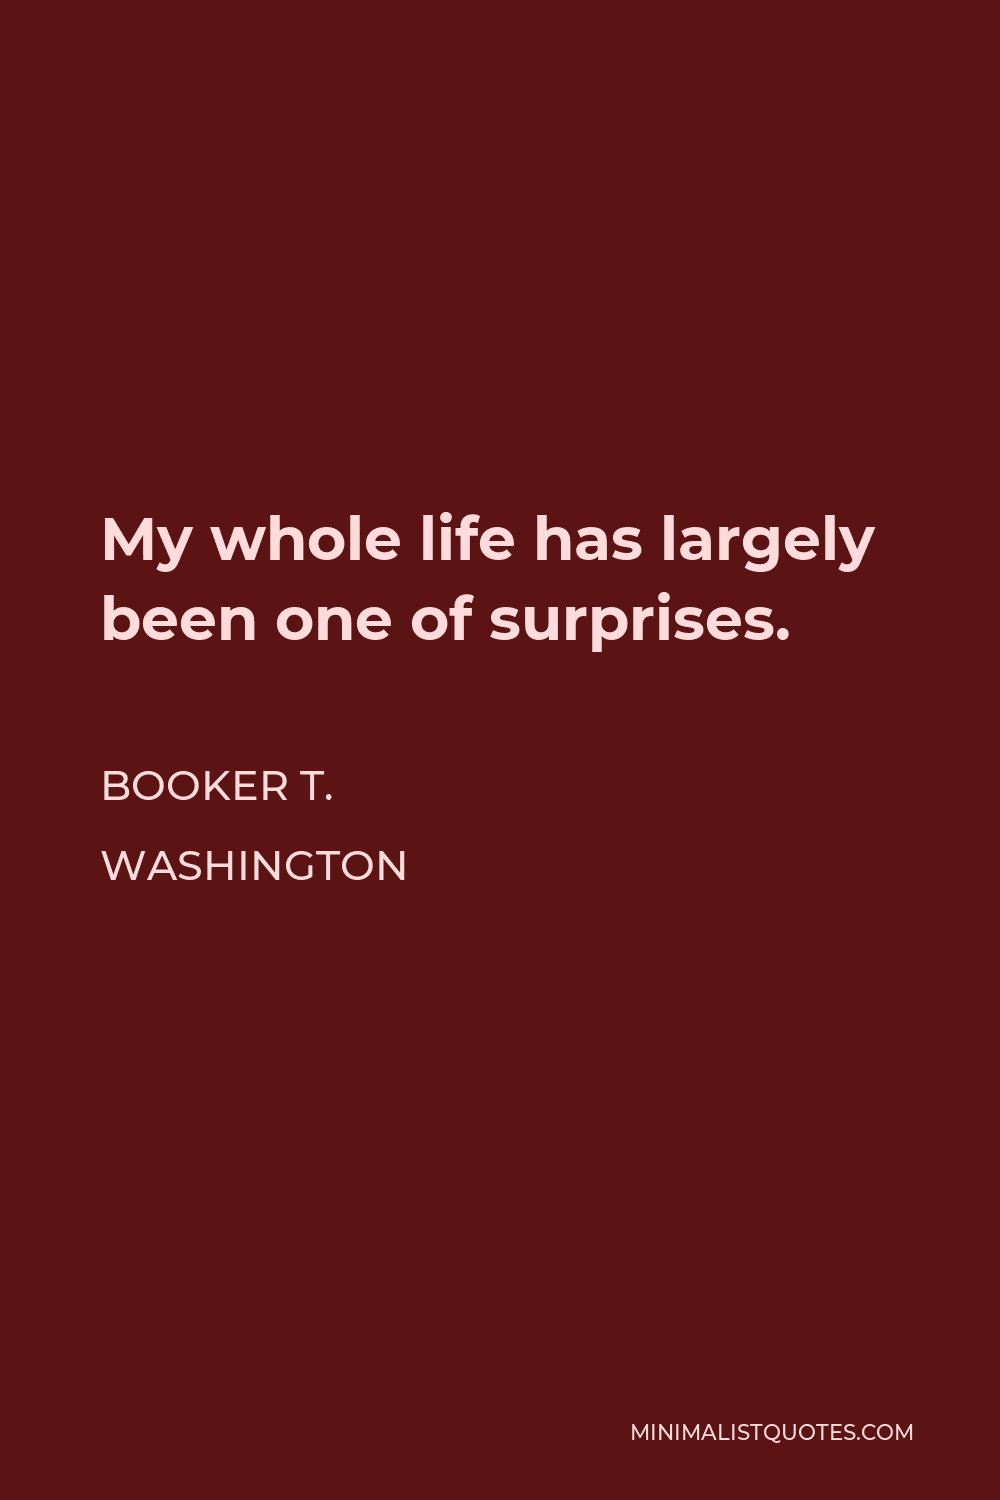 Booker T. Washington Quote - My whole life has largely been one of surprises.